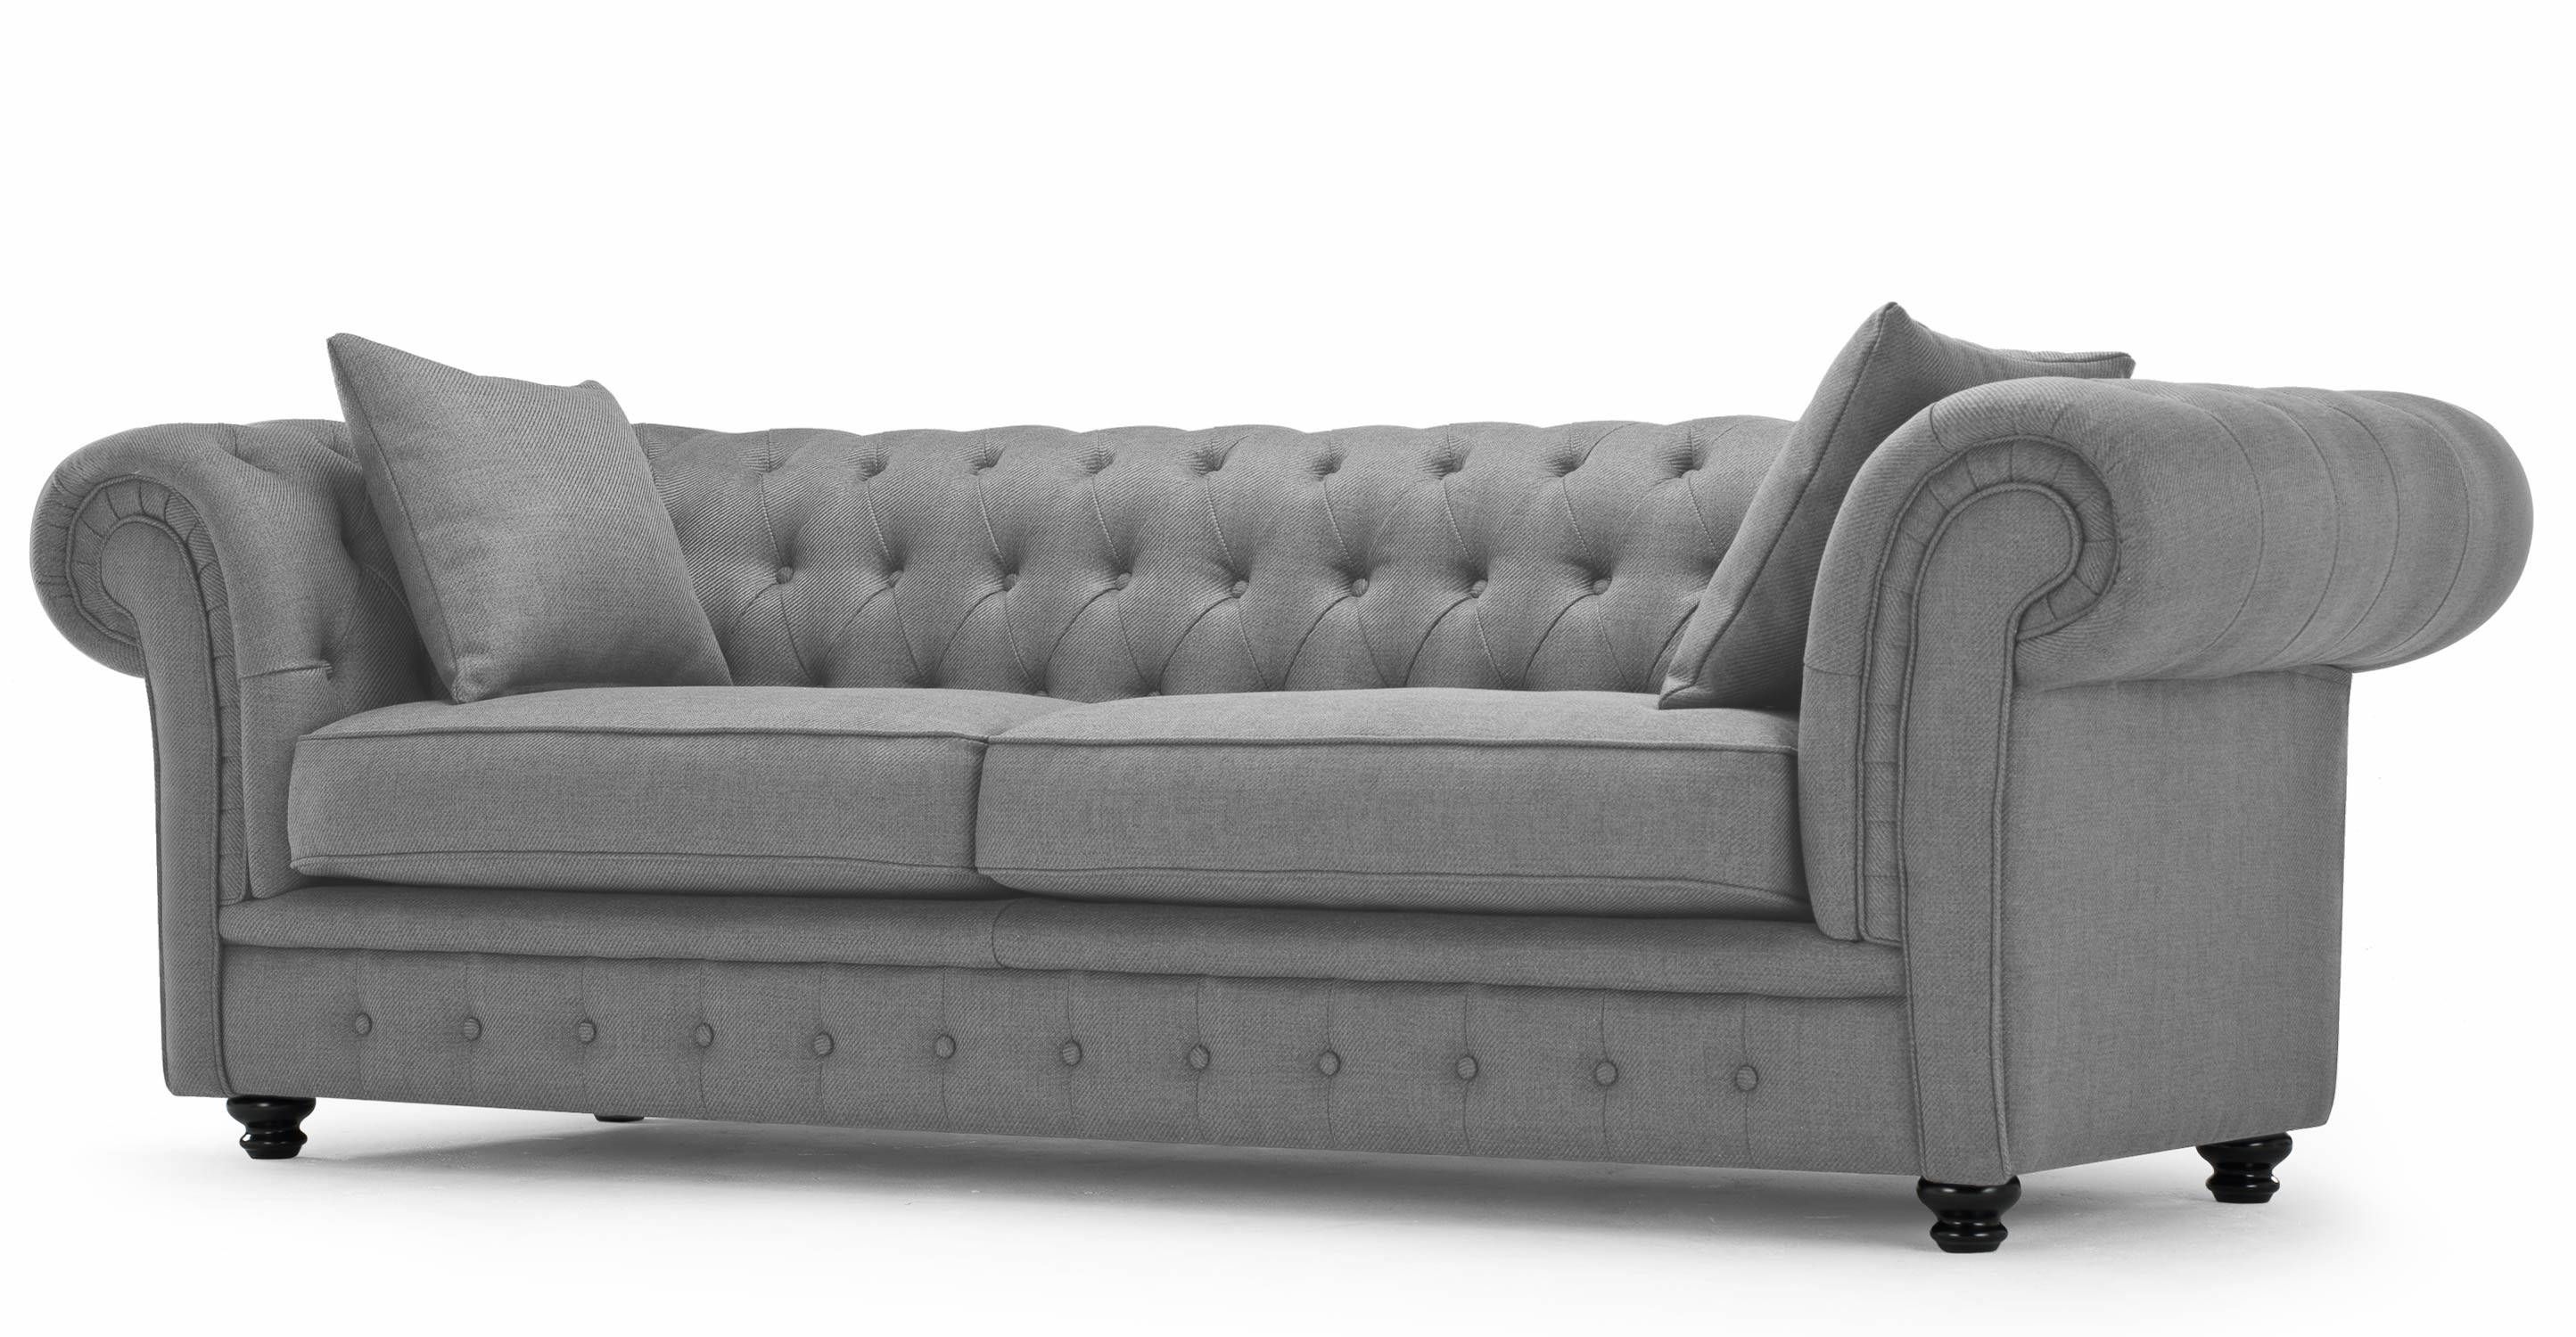 Trend Small Grey Couch 82 About Remodel Sofas And Couches Ideas With Regard To Small Grey Sofas (Photo 13 of 15)